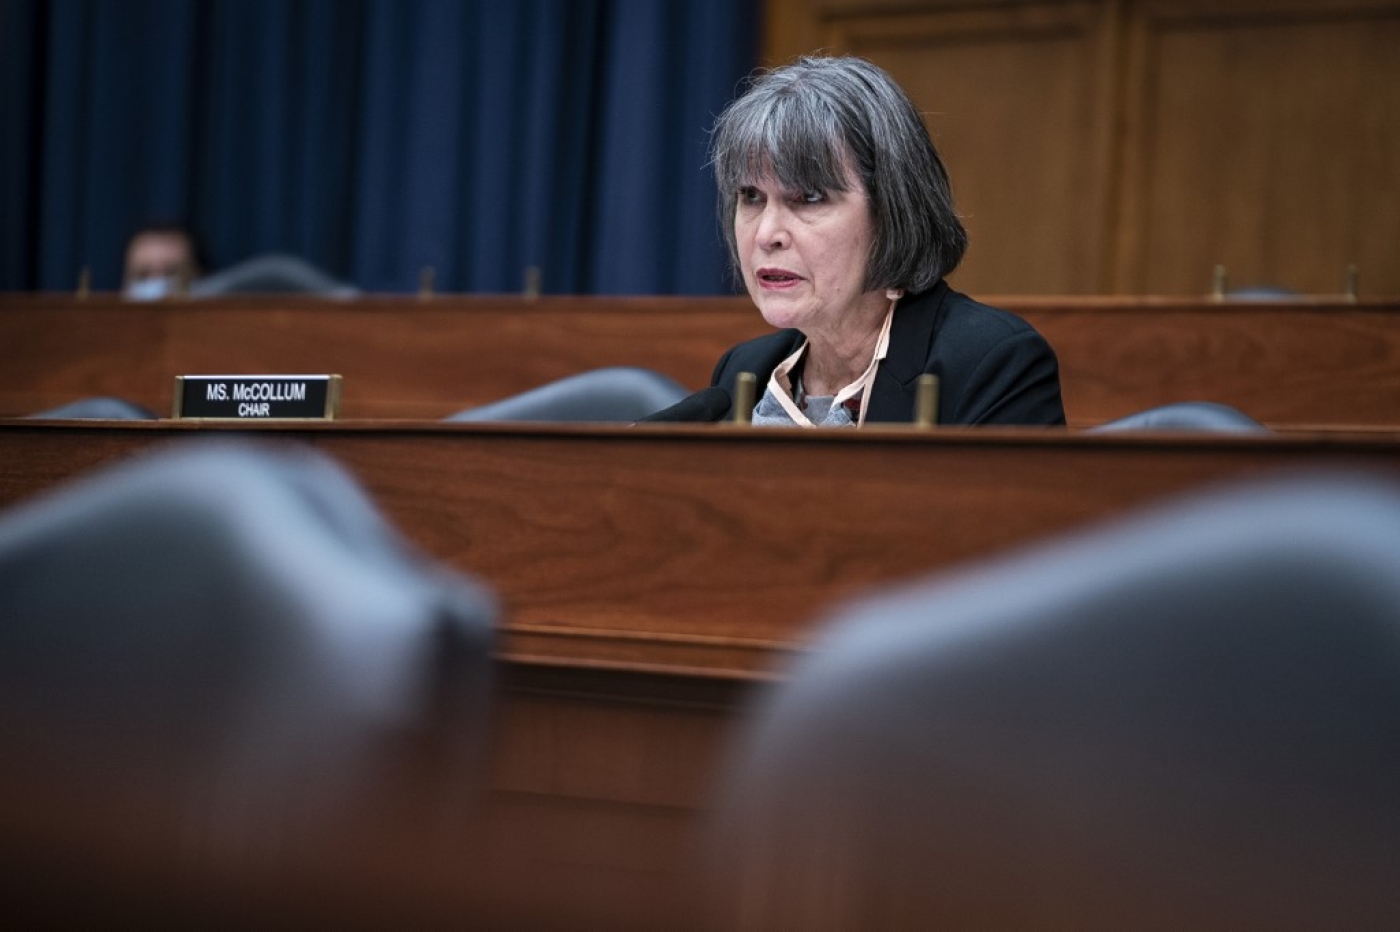 McCollum has introduced multiple bills regarding Palestinian rights during her tenure in Congress.